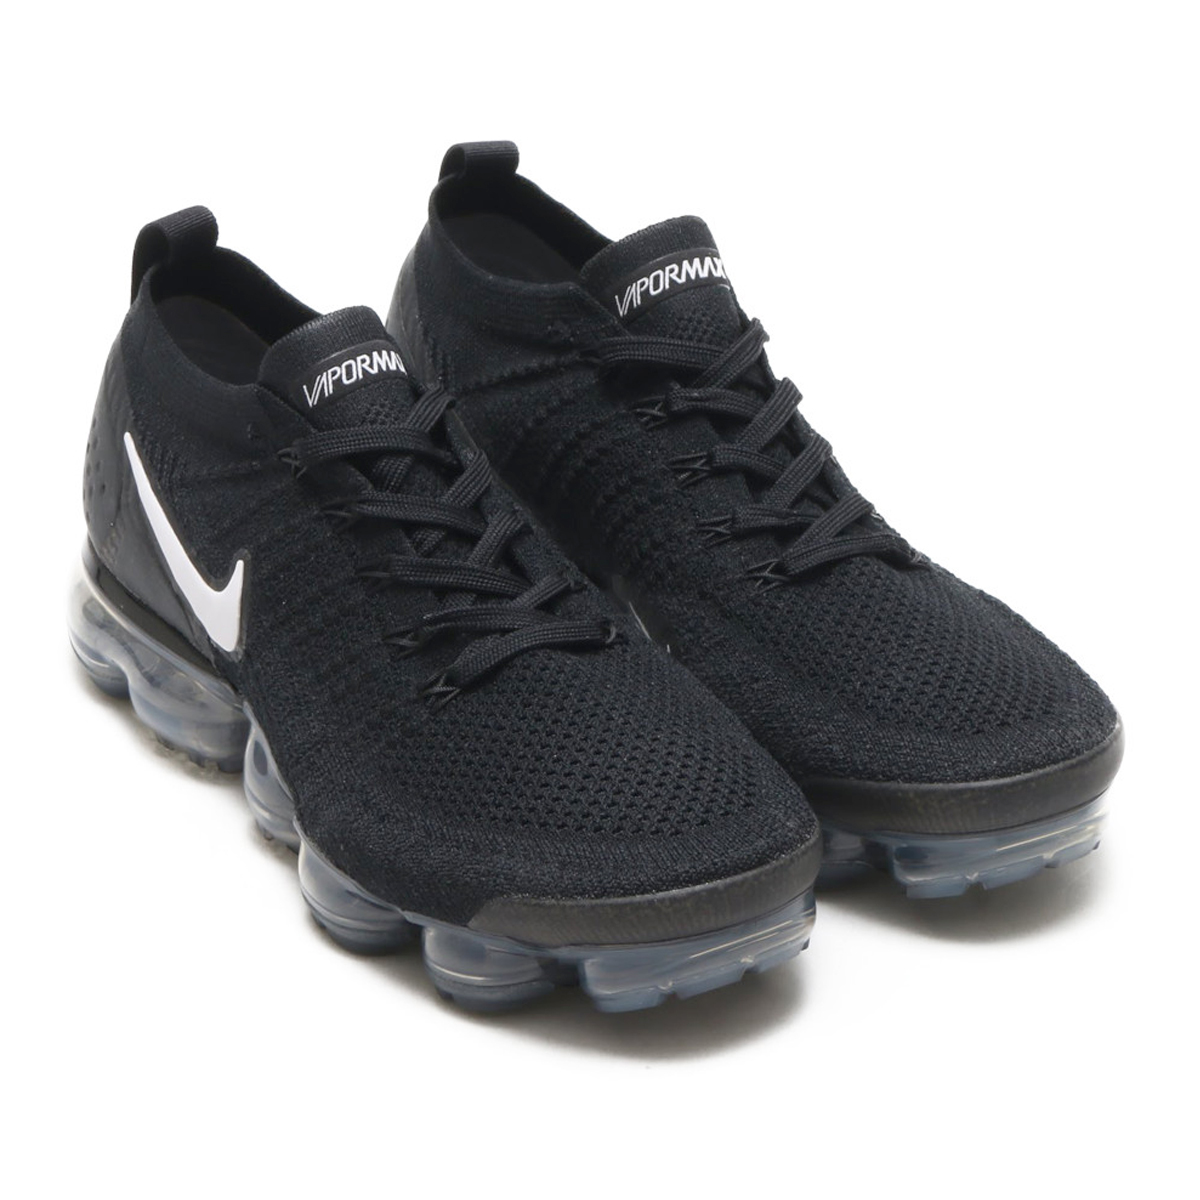 nike flyknit vapormax black and white